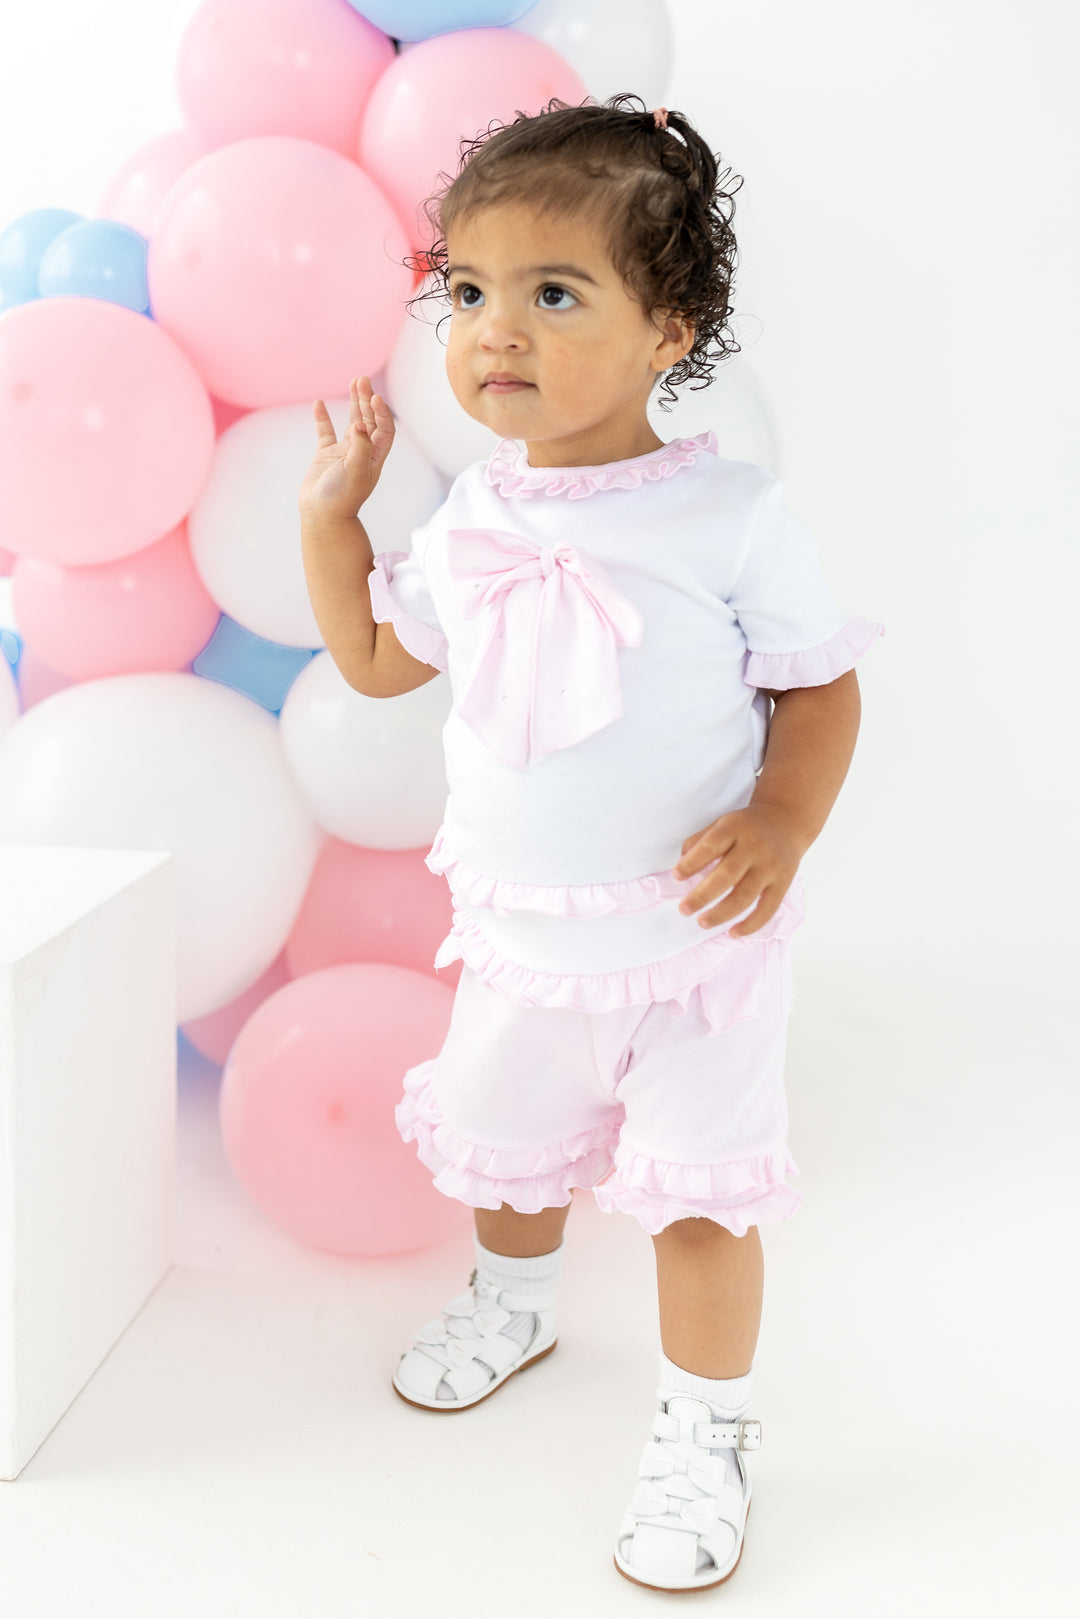 Blues Baby "Talulla" Pink Blouse & Shorts | Millie and John